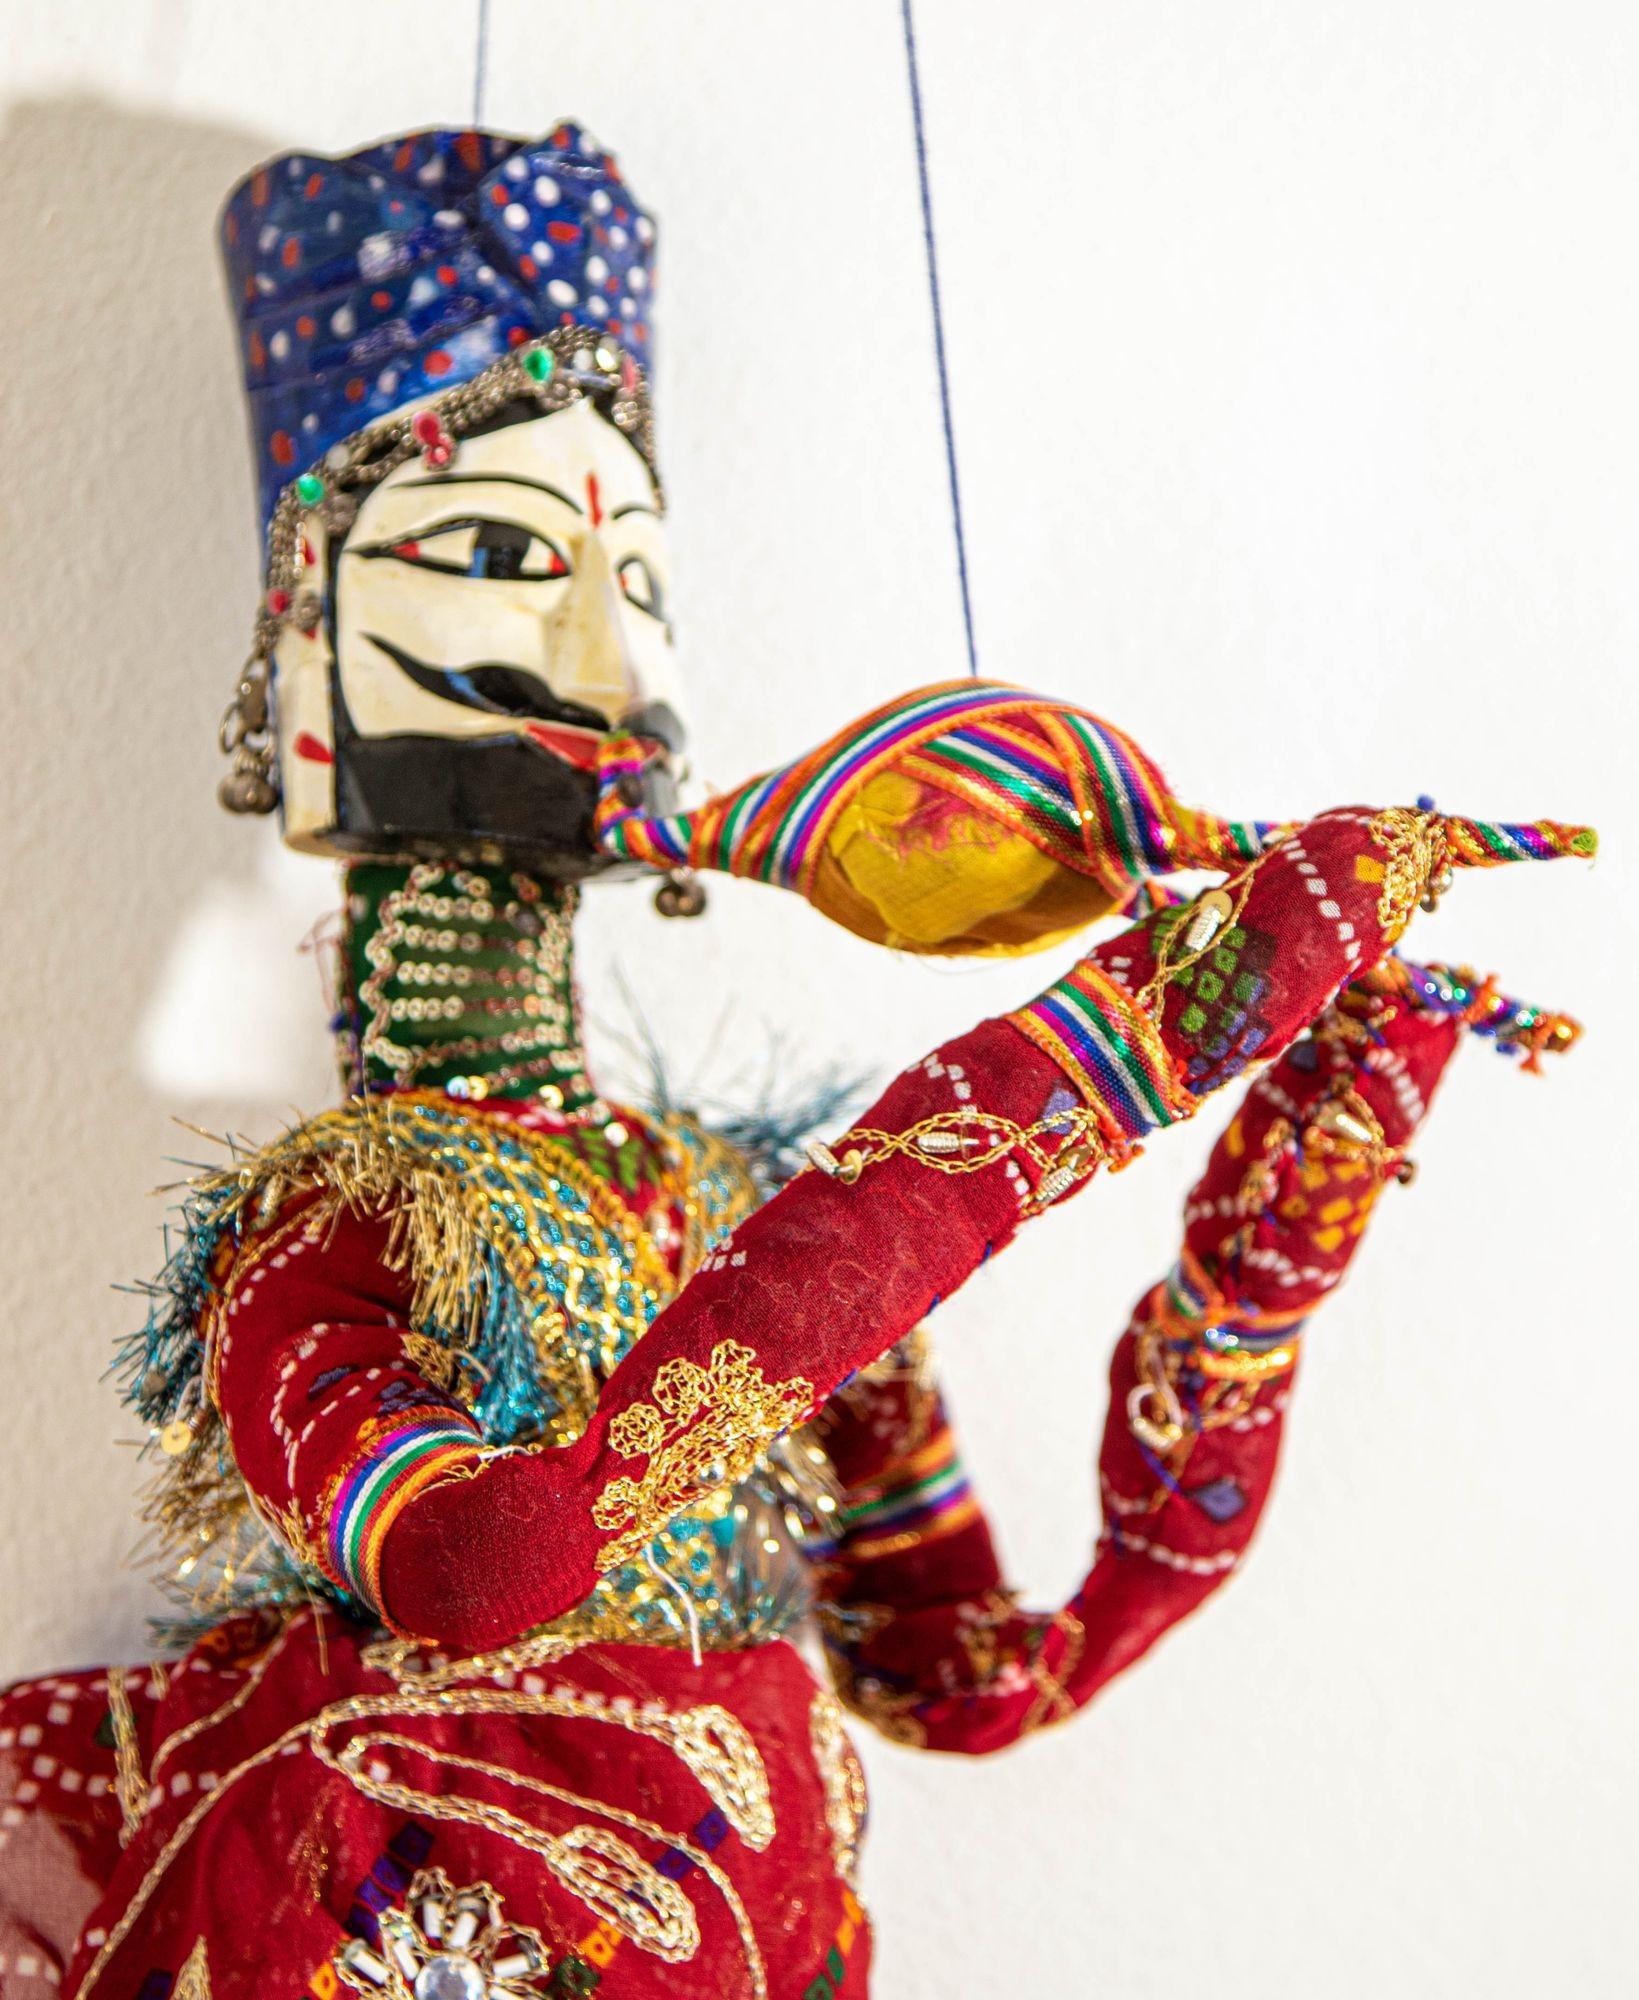 Handmade Rajasthani Kathputli Dancing Puppet Couple Jaipur India 1950s In Good Condition For Sale In North Hollywood, CA